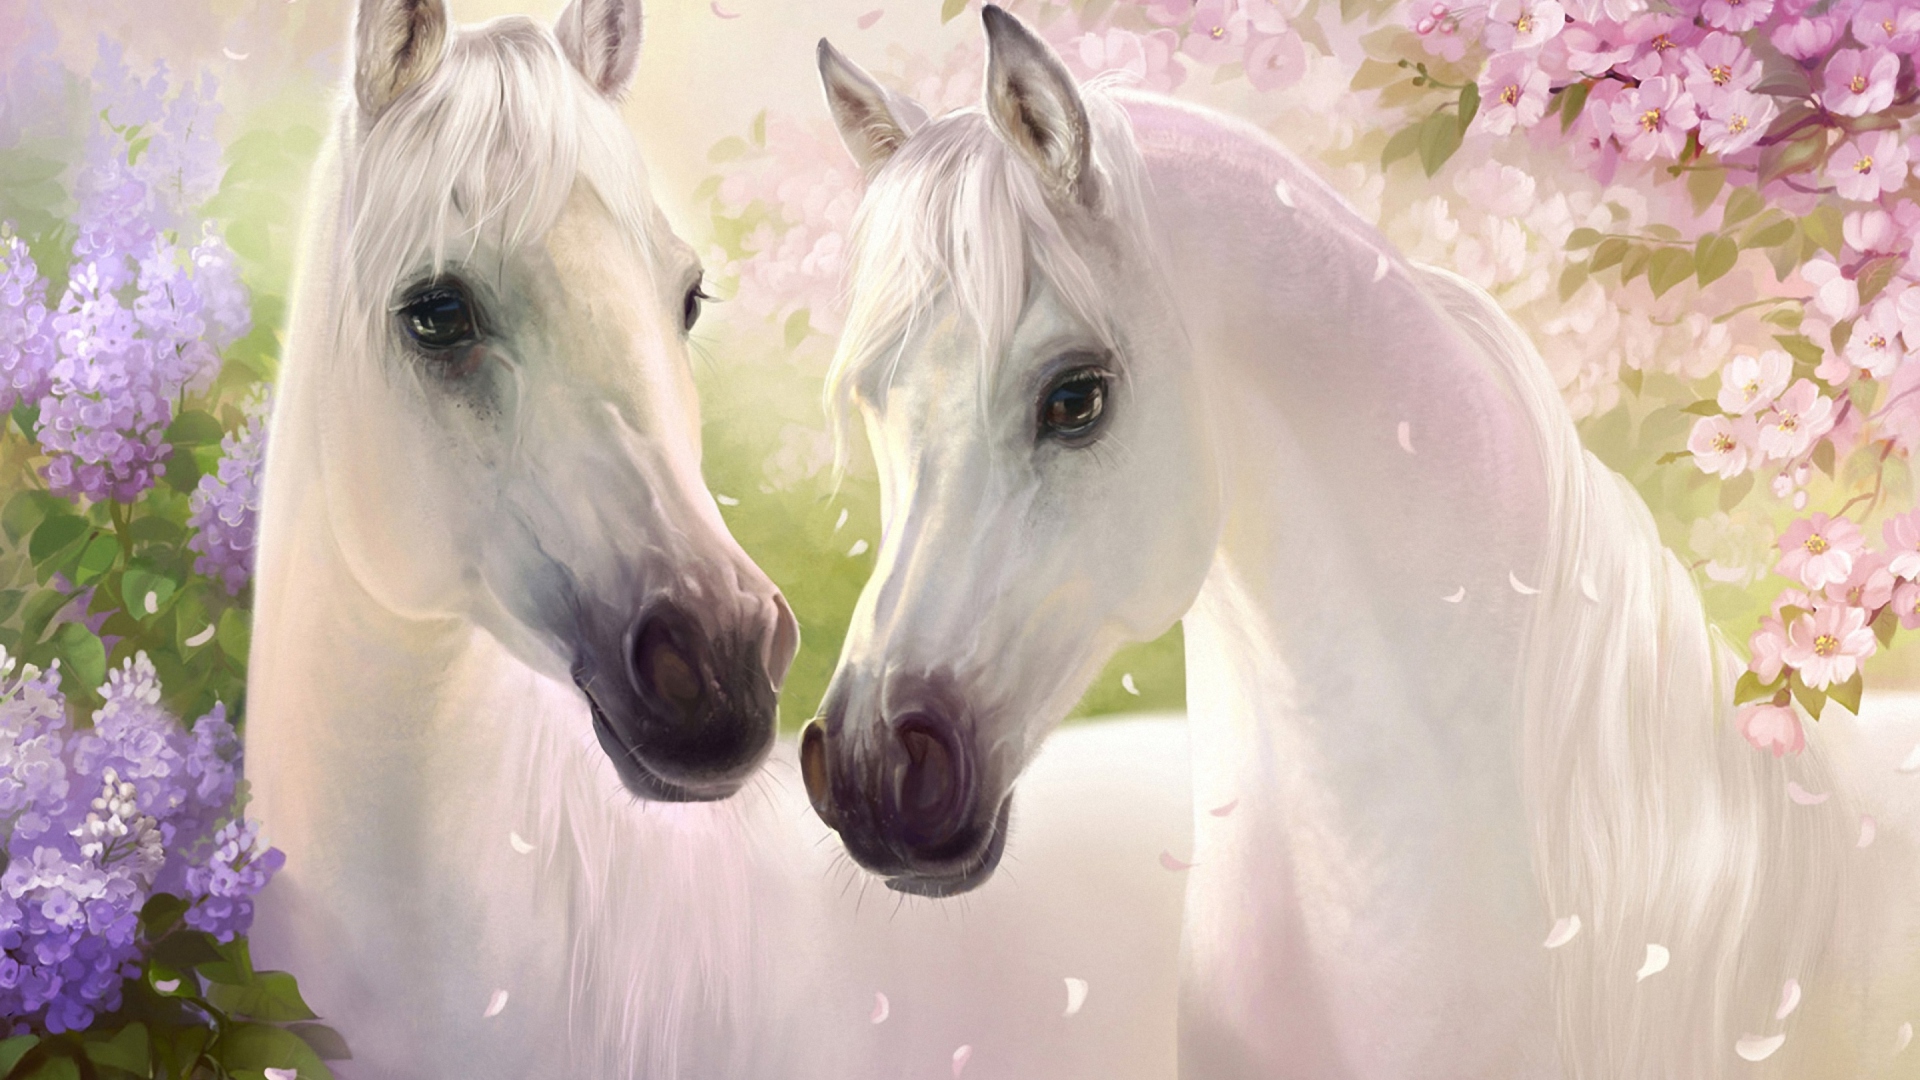 White Horse Painting wallpaper 1920x1080